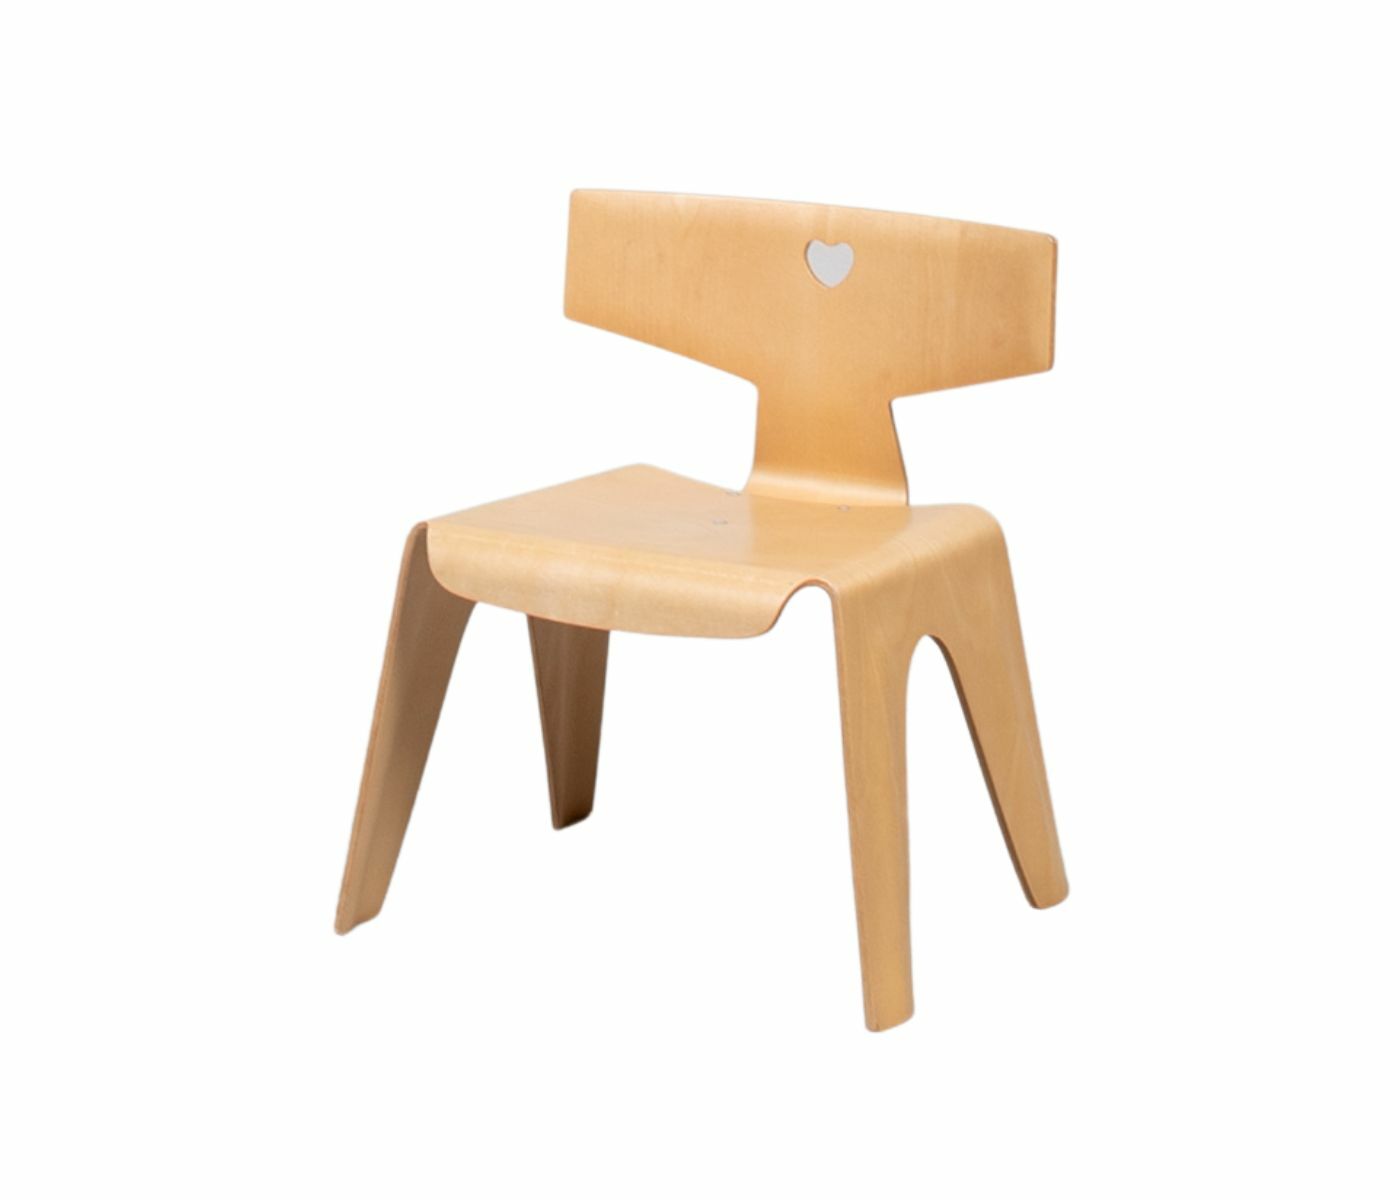 Vitra Eames Children’s Chair helles Holz 0